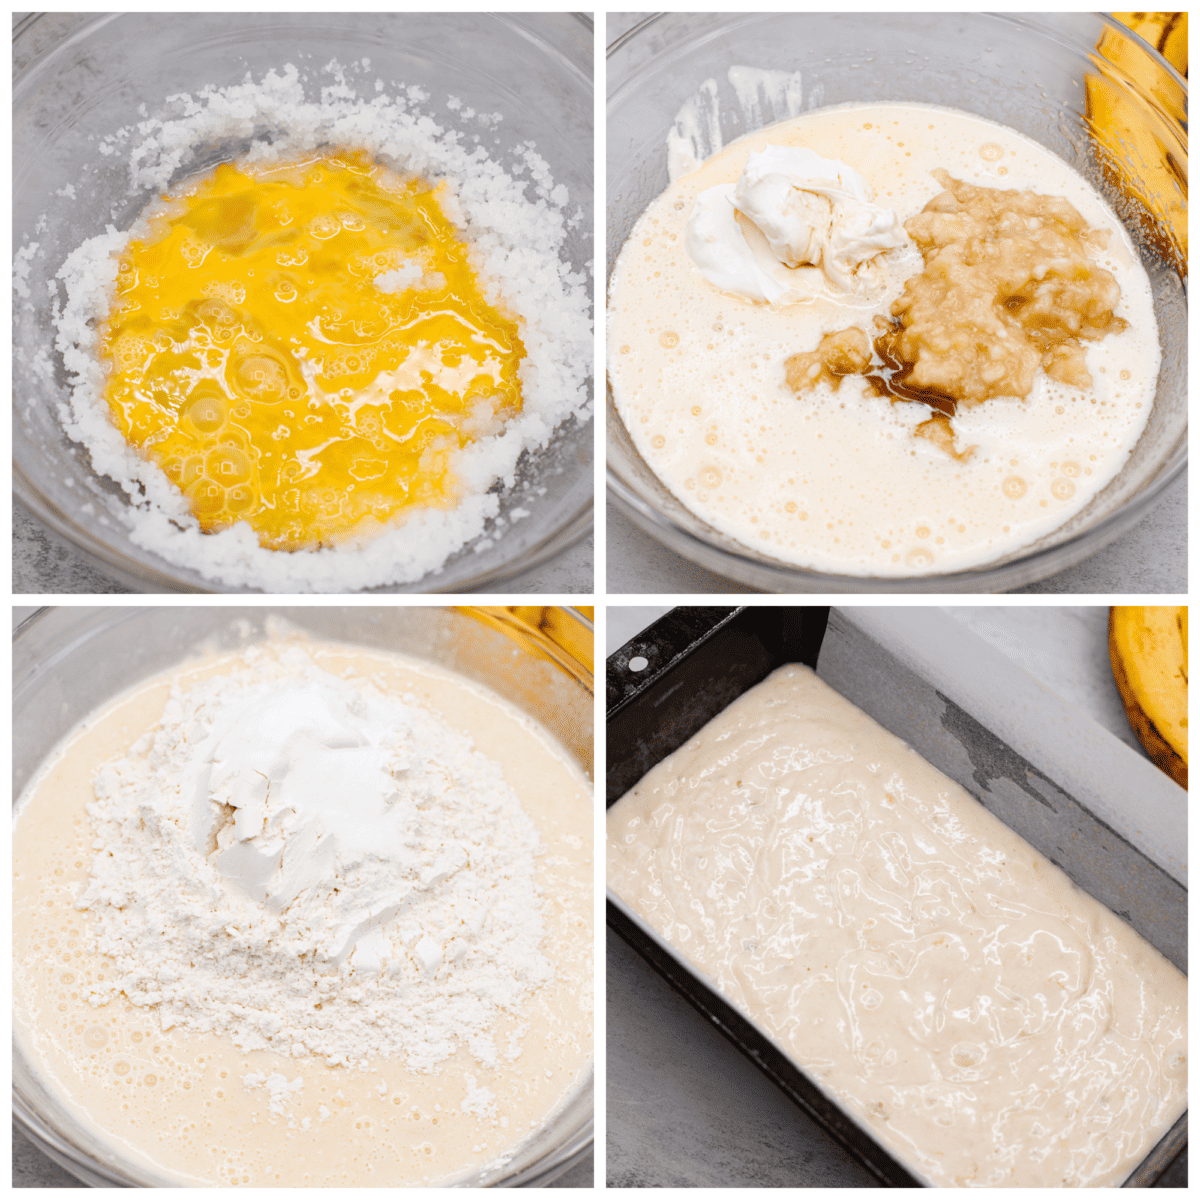 3-photo collage of the batter being mixed together.